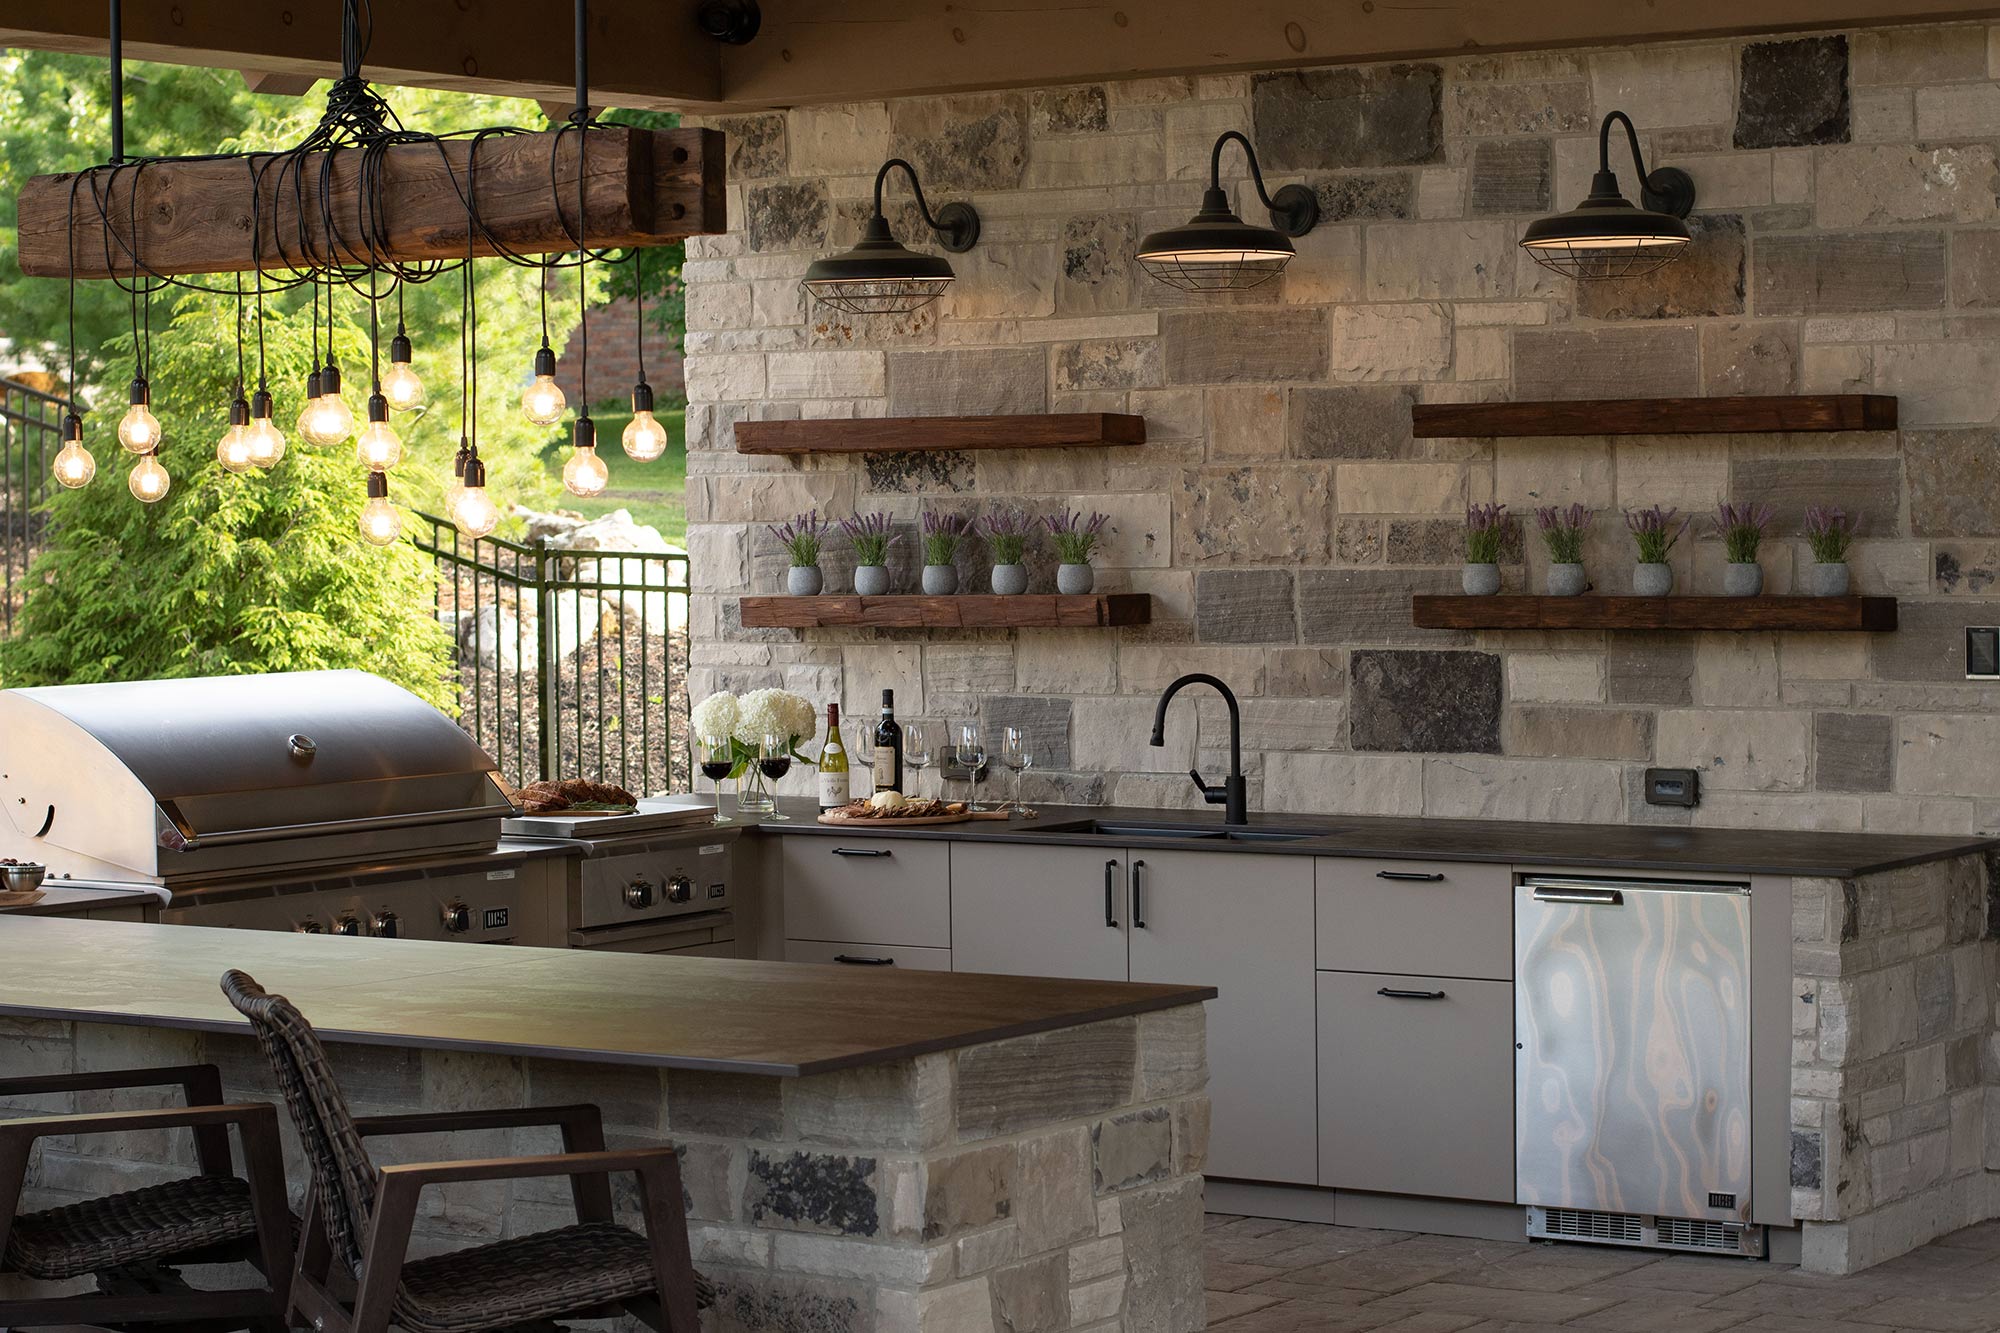 Image of Urban Bonfire x Frontiers Design Build 1 in The perfect rustic outdoor kitchen with Dekton and Urban Bonfire - Cosentino